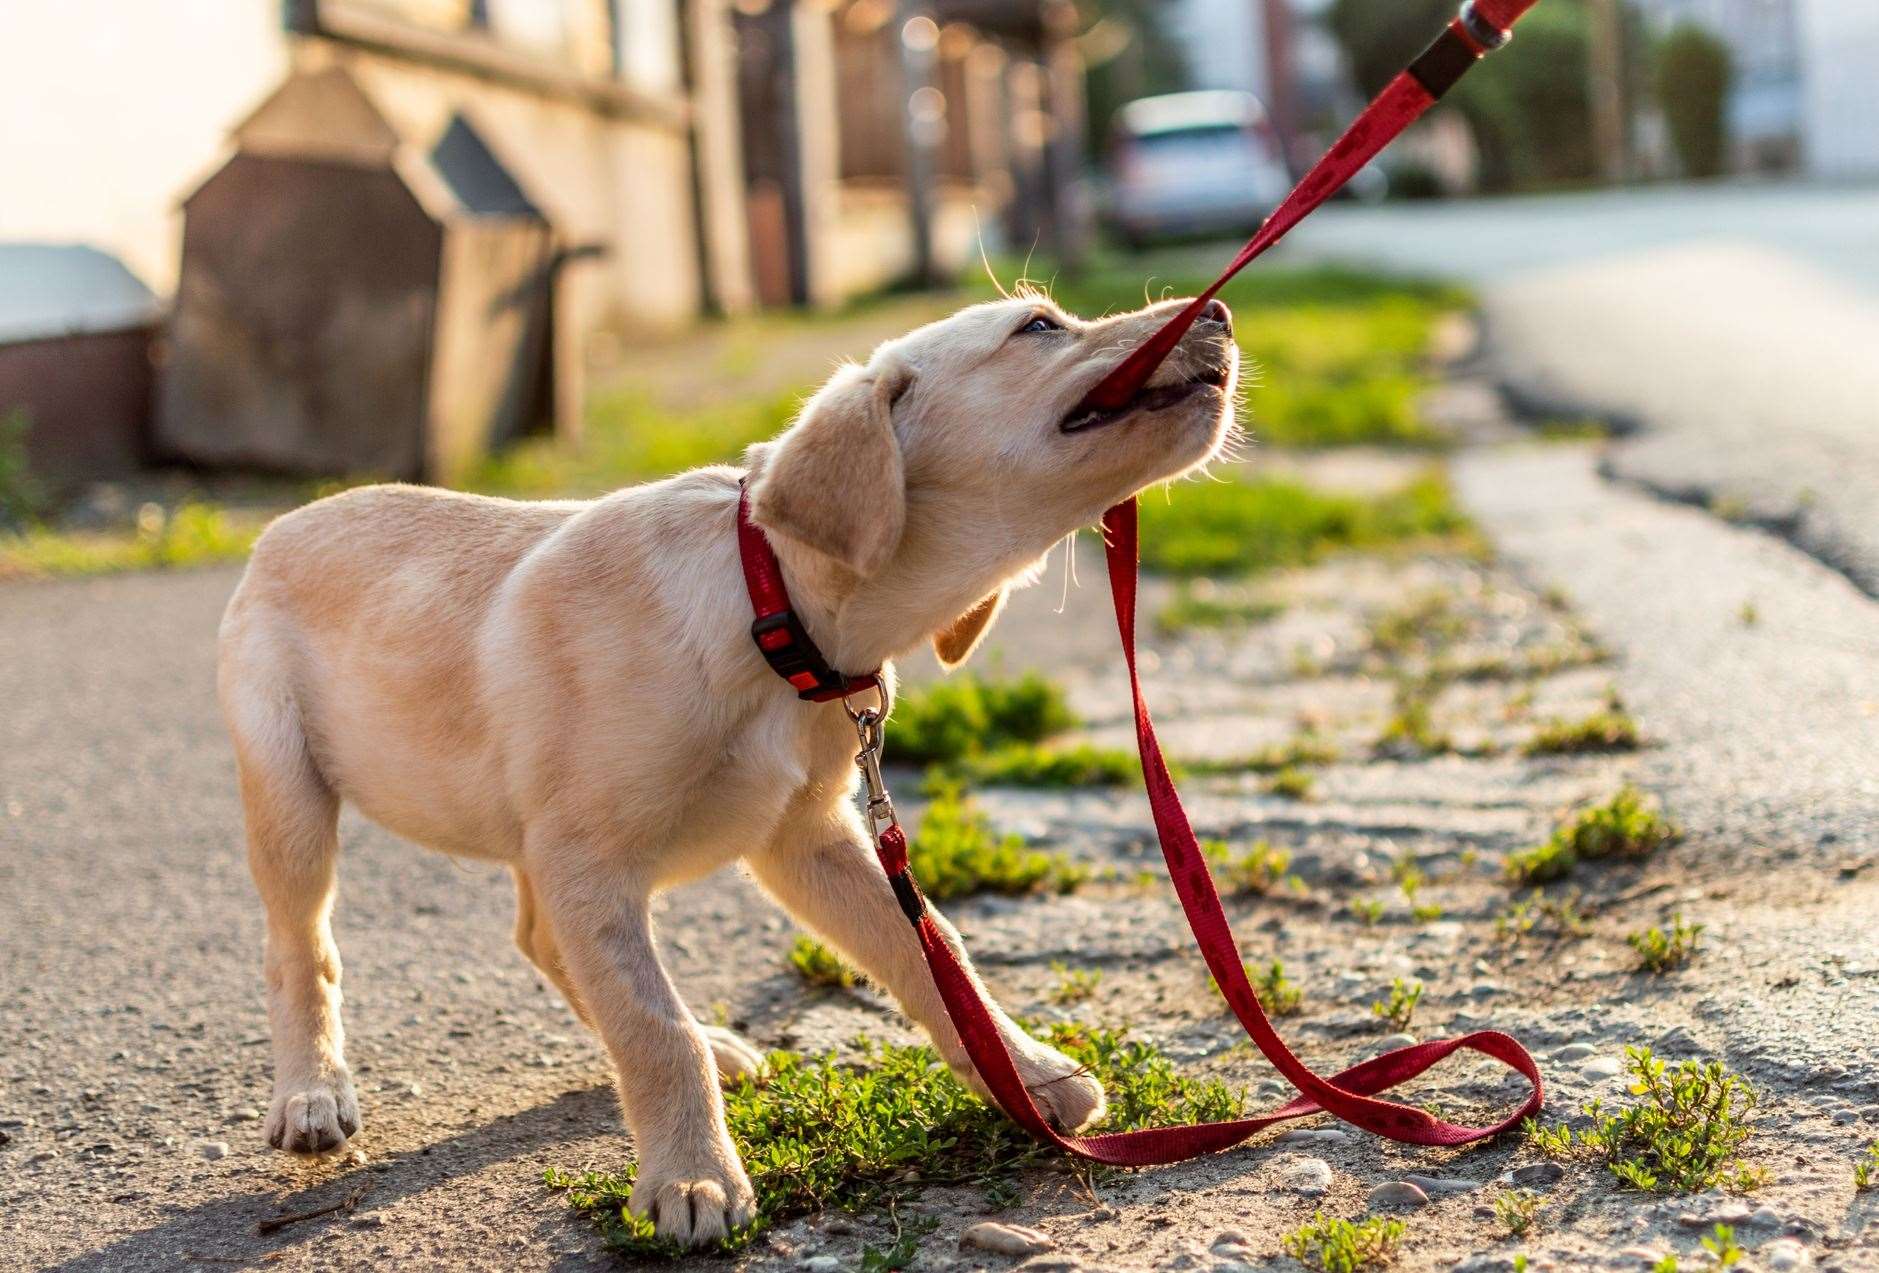 Does your labrador test your patience with is cheeky ways? Image: iStock.